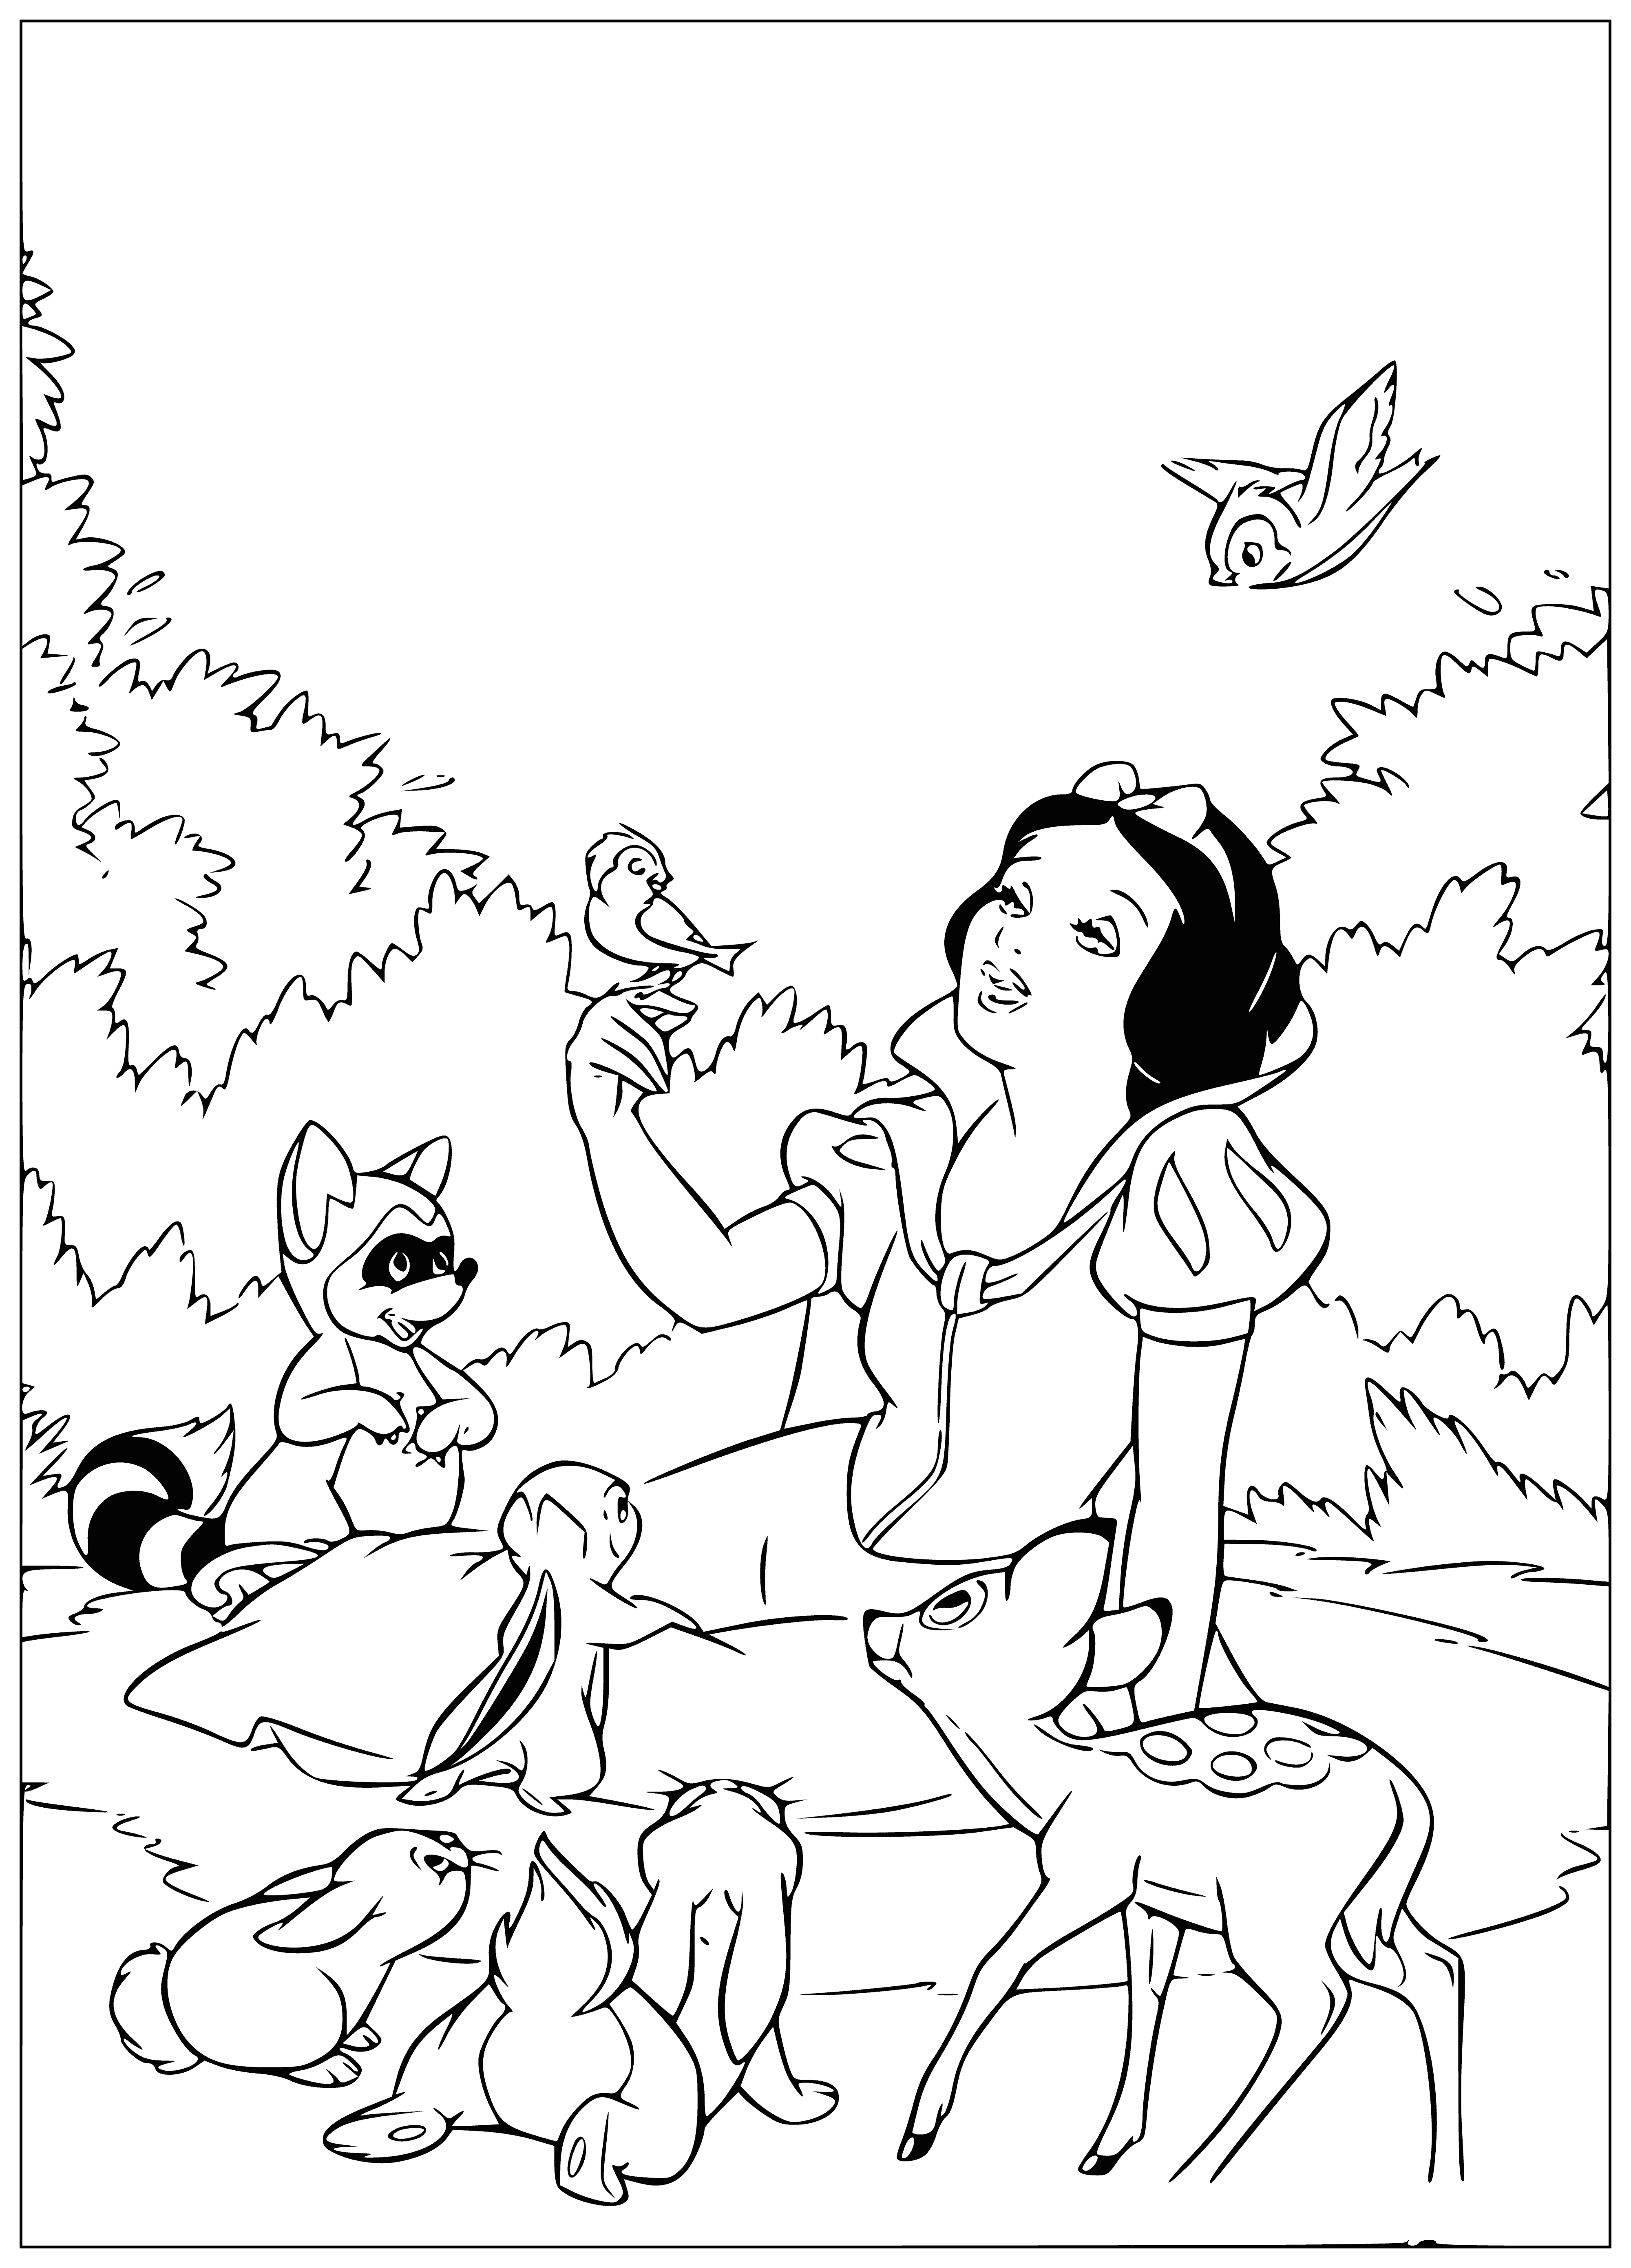 coloring page: Woman stands before 7 strange creatures: pointy ears, big noses, oversized clothes; they fear & wonder at her beauty.